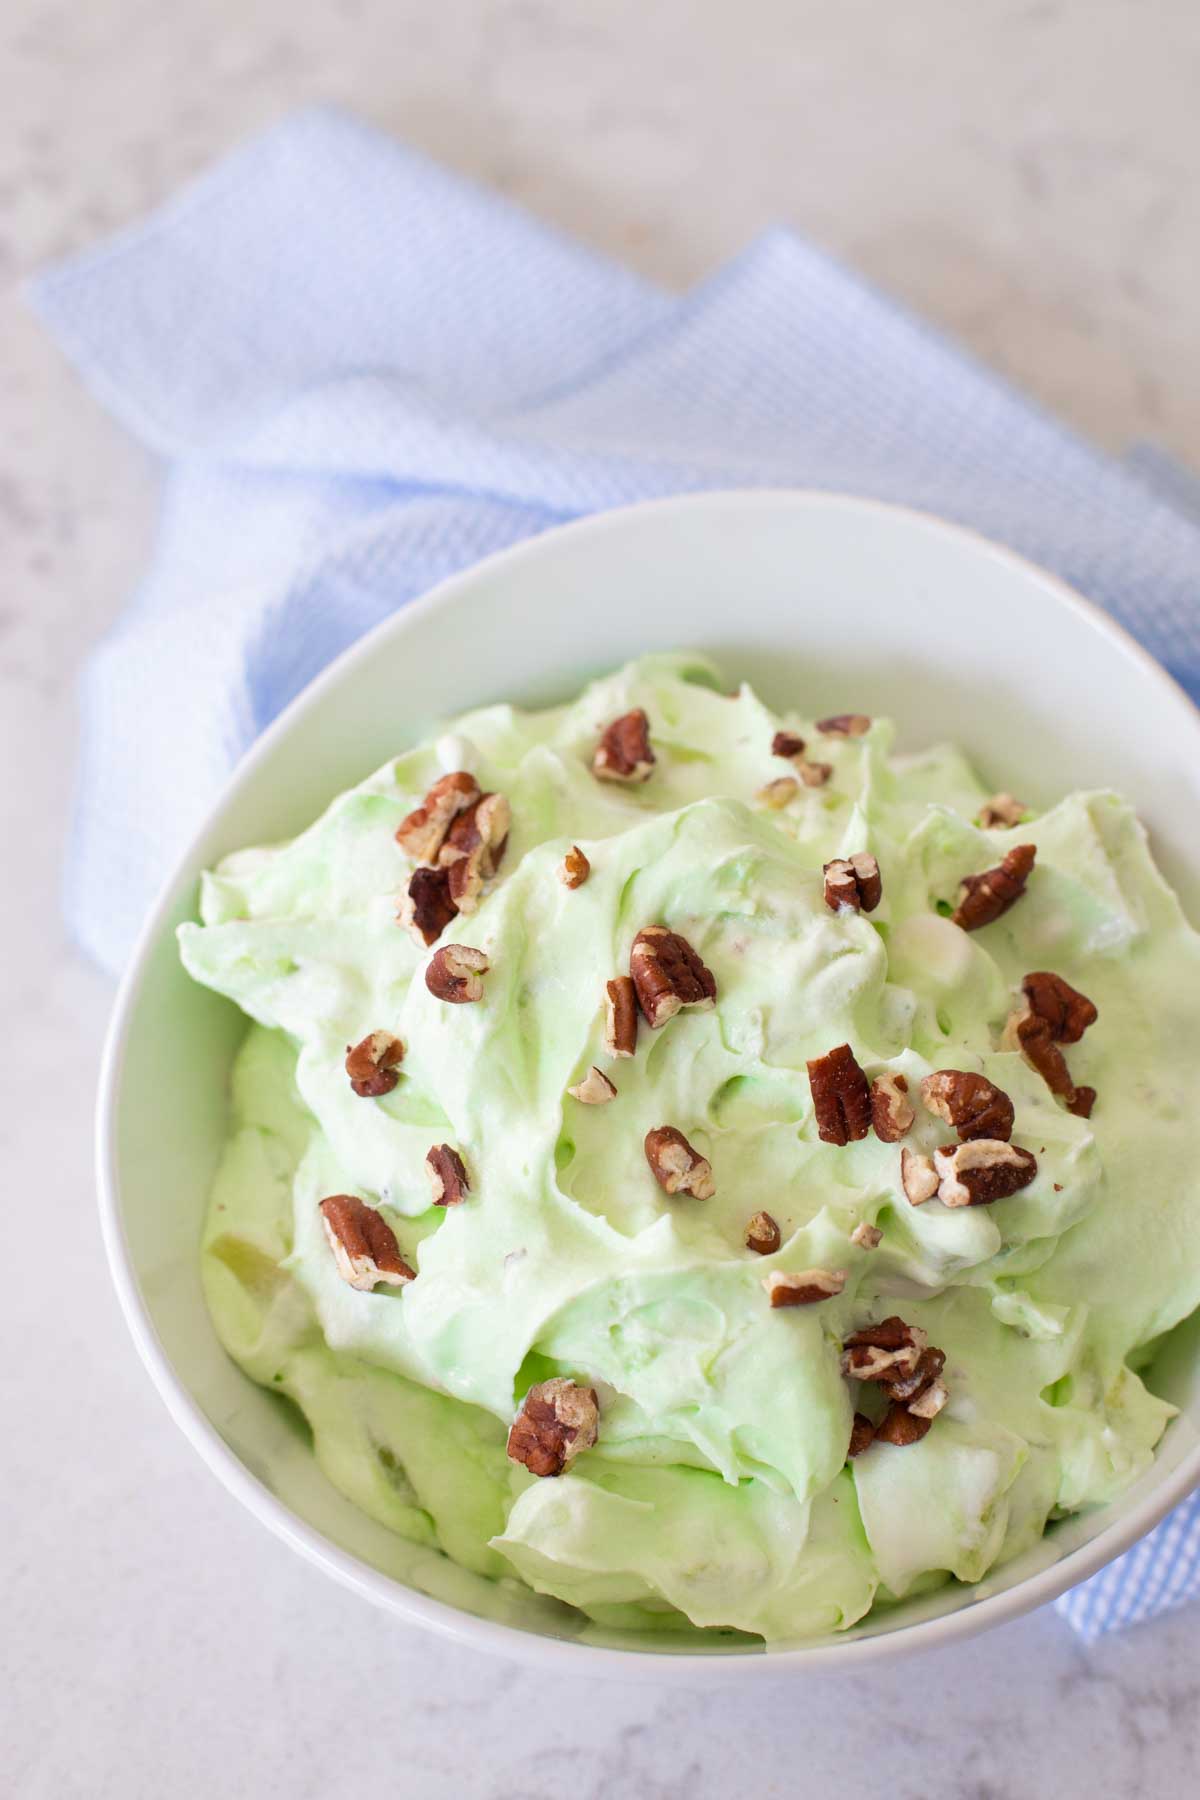 A serving bowl of pistachio fluff with chopped pecans sprinkled over the top has a blue napkin on the side.